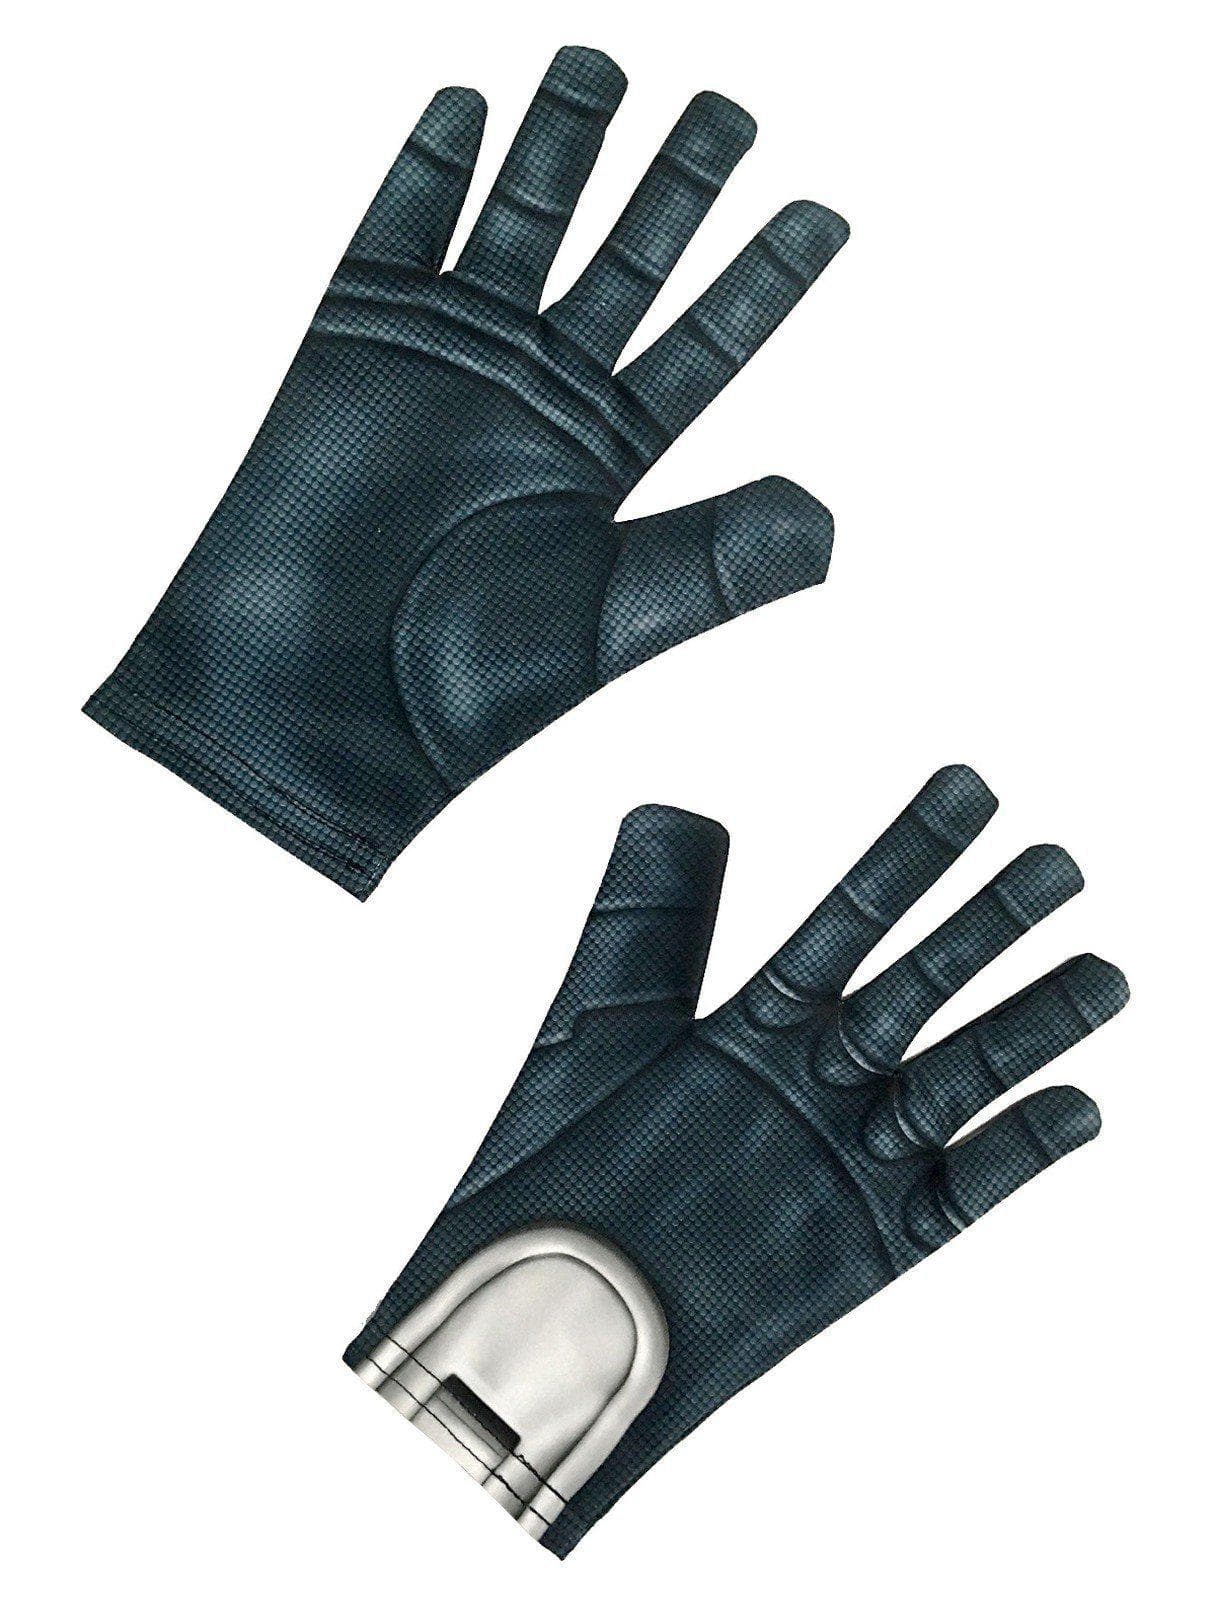 Adult Marvel Ant-Man and the Wasp - Wasp Gloves - costumes.com